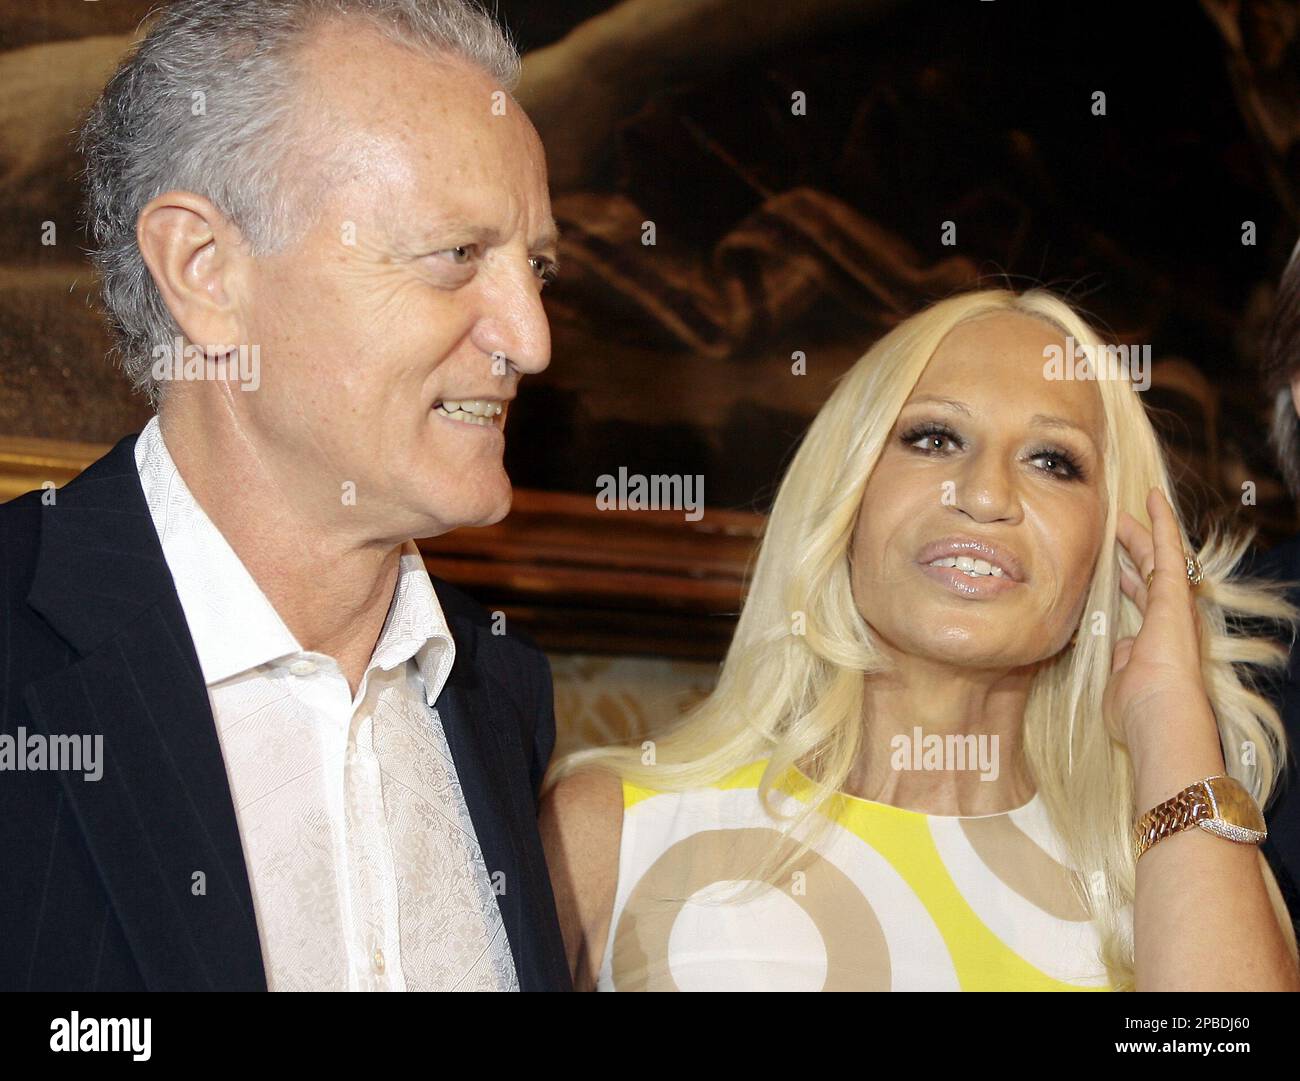 Editie Onbeleefd galop Italian fashion designer Donatella Versace with his brother Santo, left,  attend a press conference in Milan, Italy, Friday, June 15, 2007, to  present a series of initiatives on occasion of the tenth